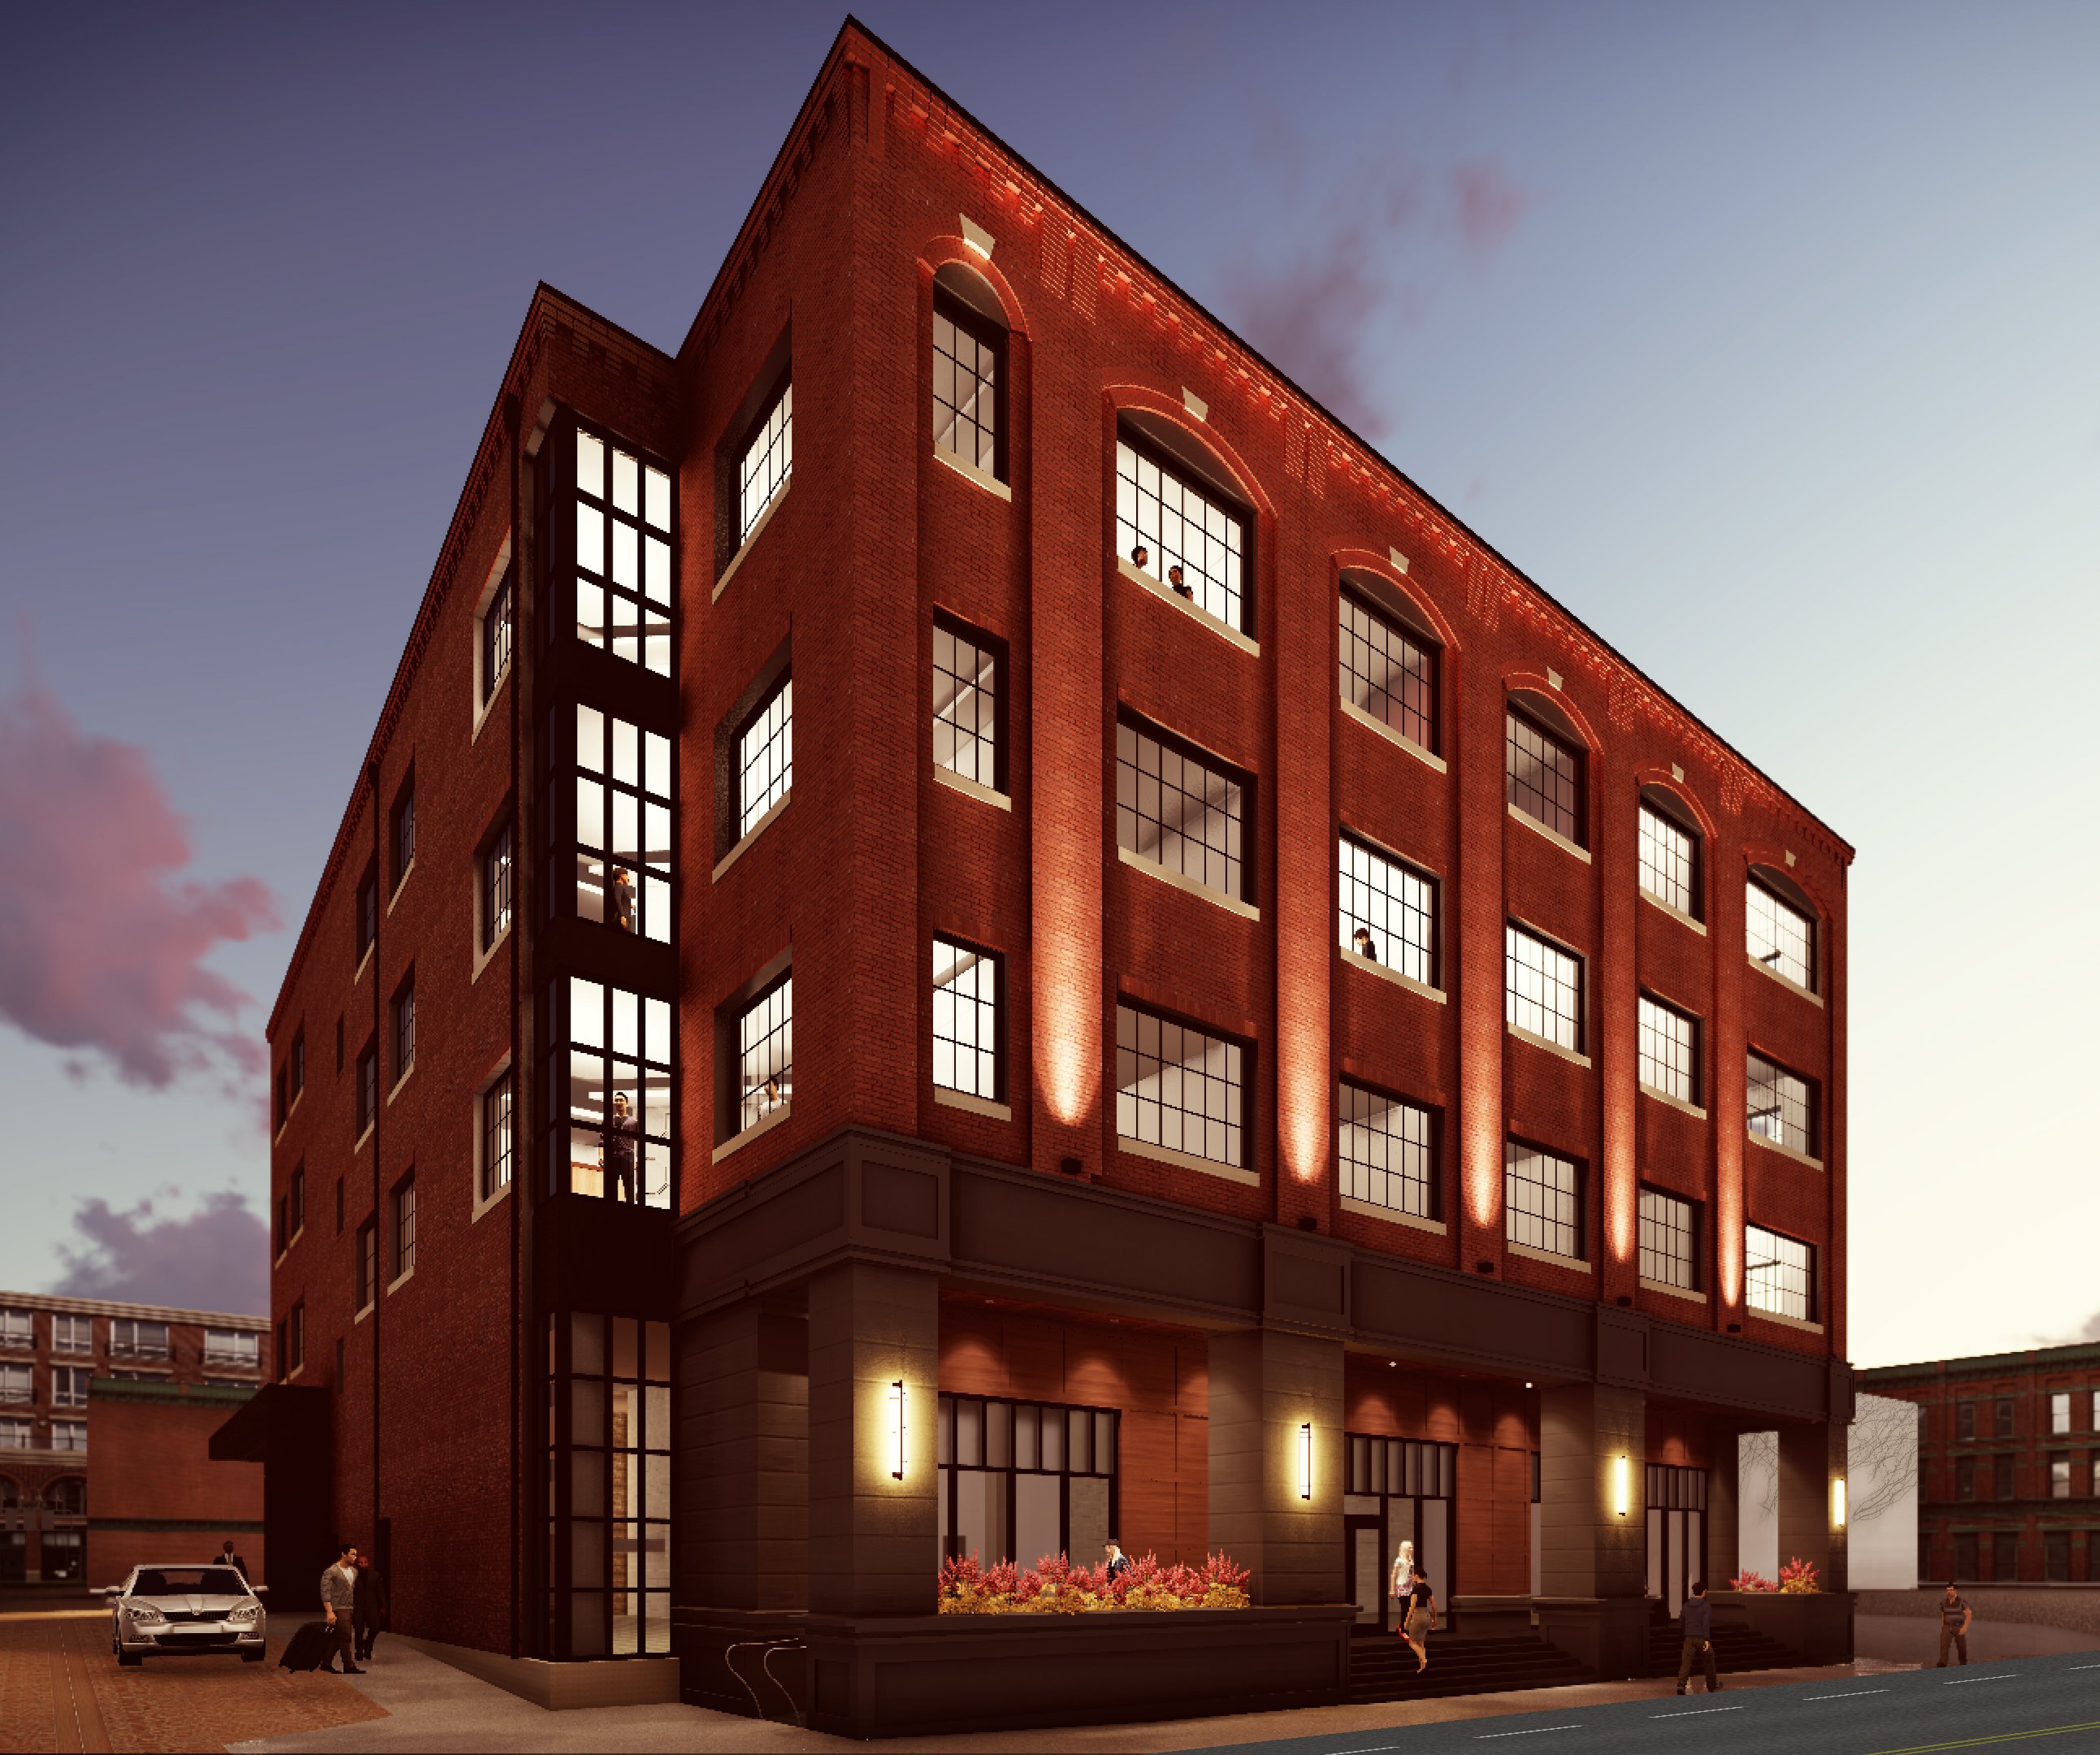 Plans for Hotel Vandivort's expansion in downtown Springfield MO